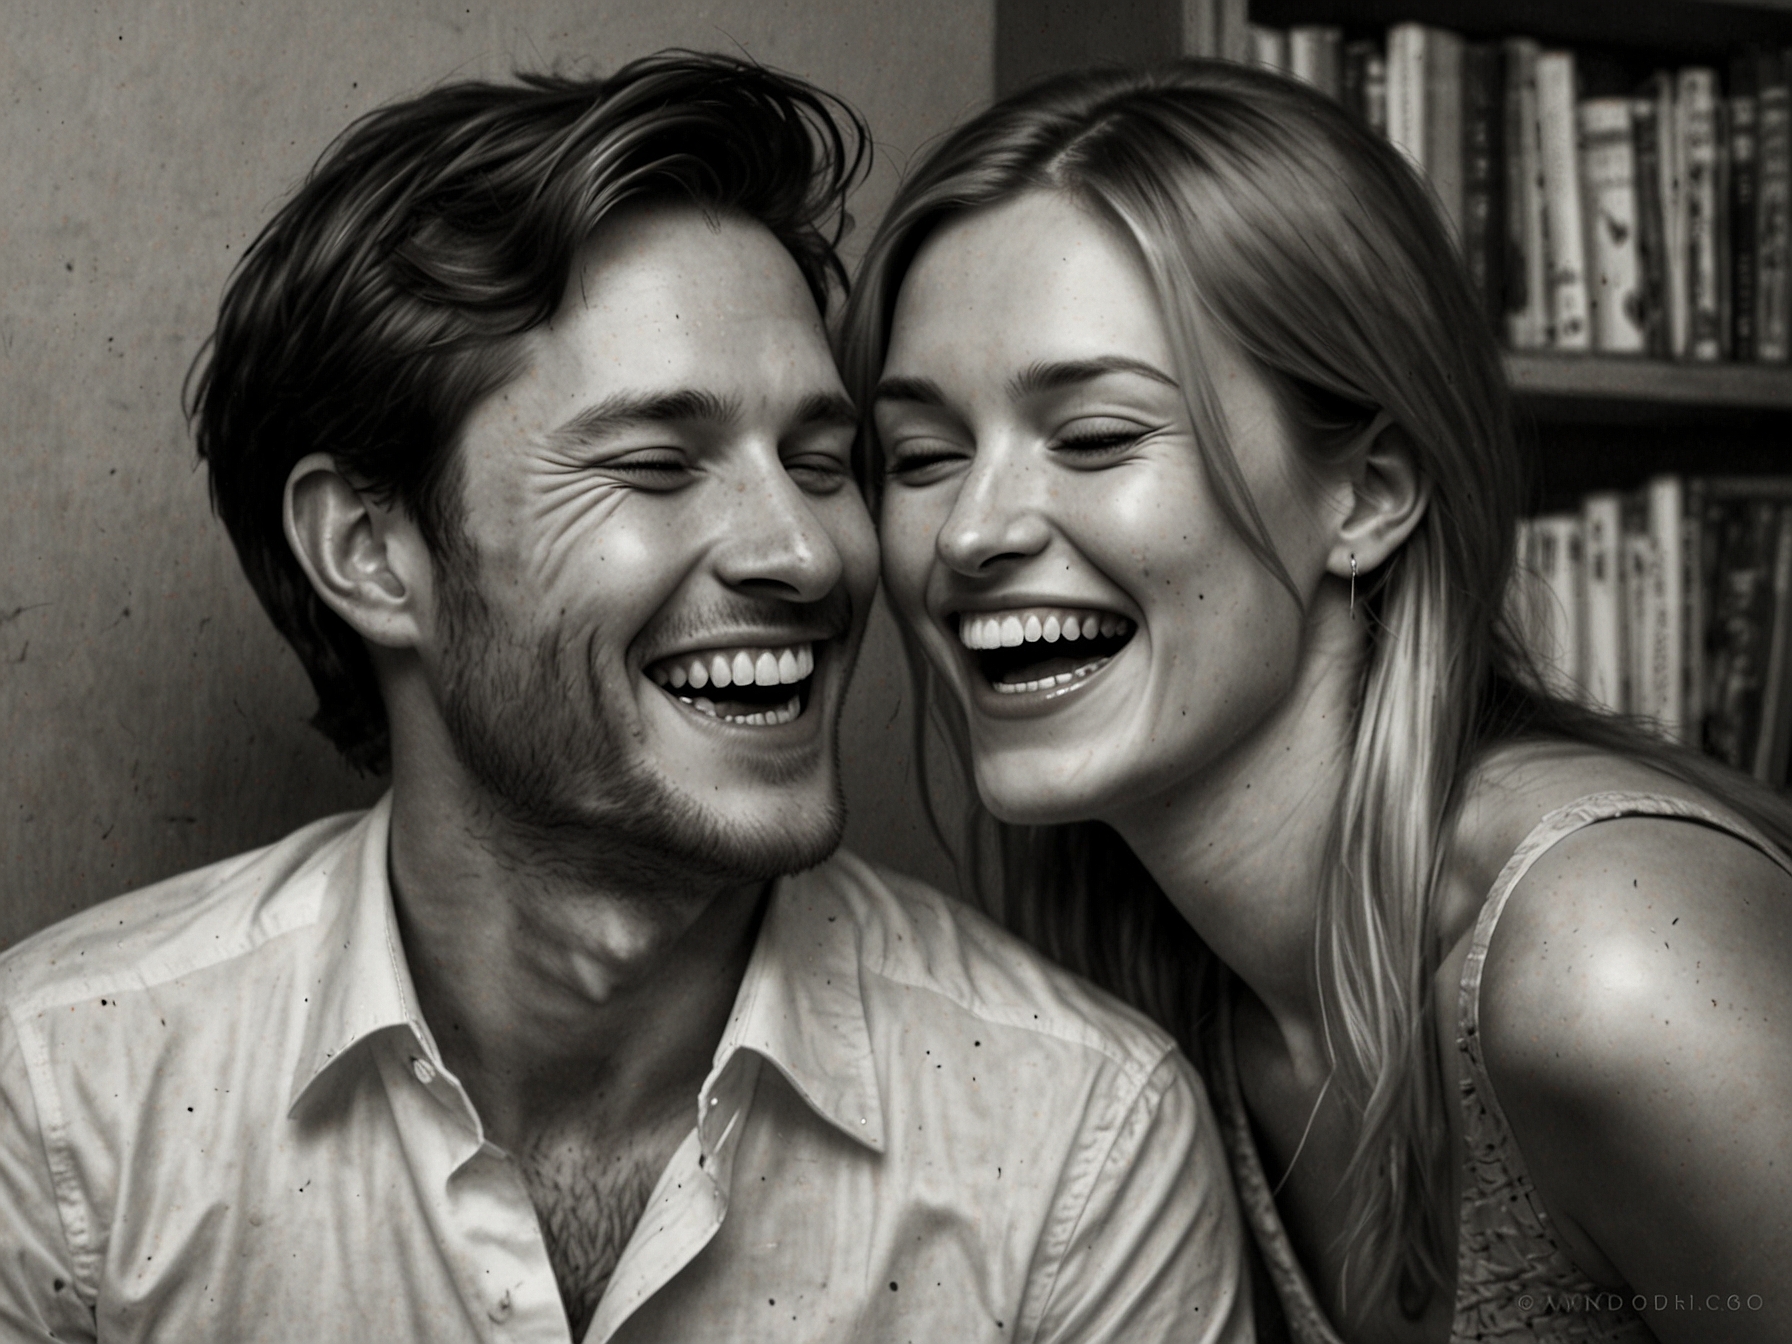 A candid moment of Jack and Hanni laughing together, radiating happiness and love, reflecting the joy they share in their engagement announcement.